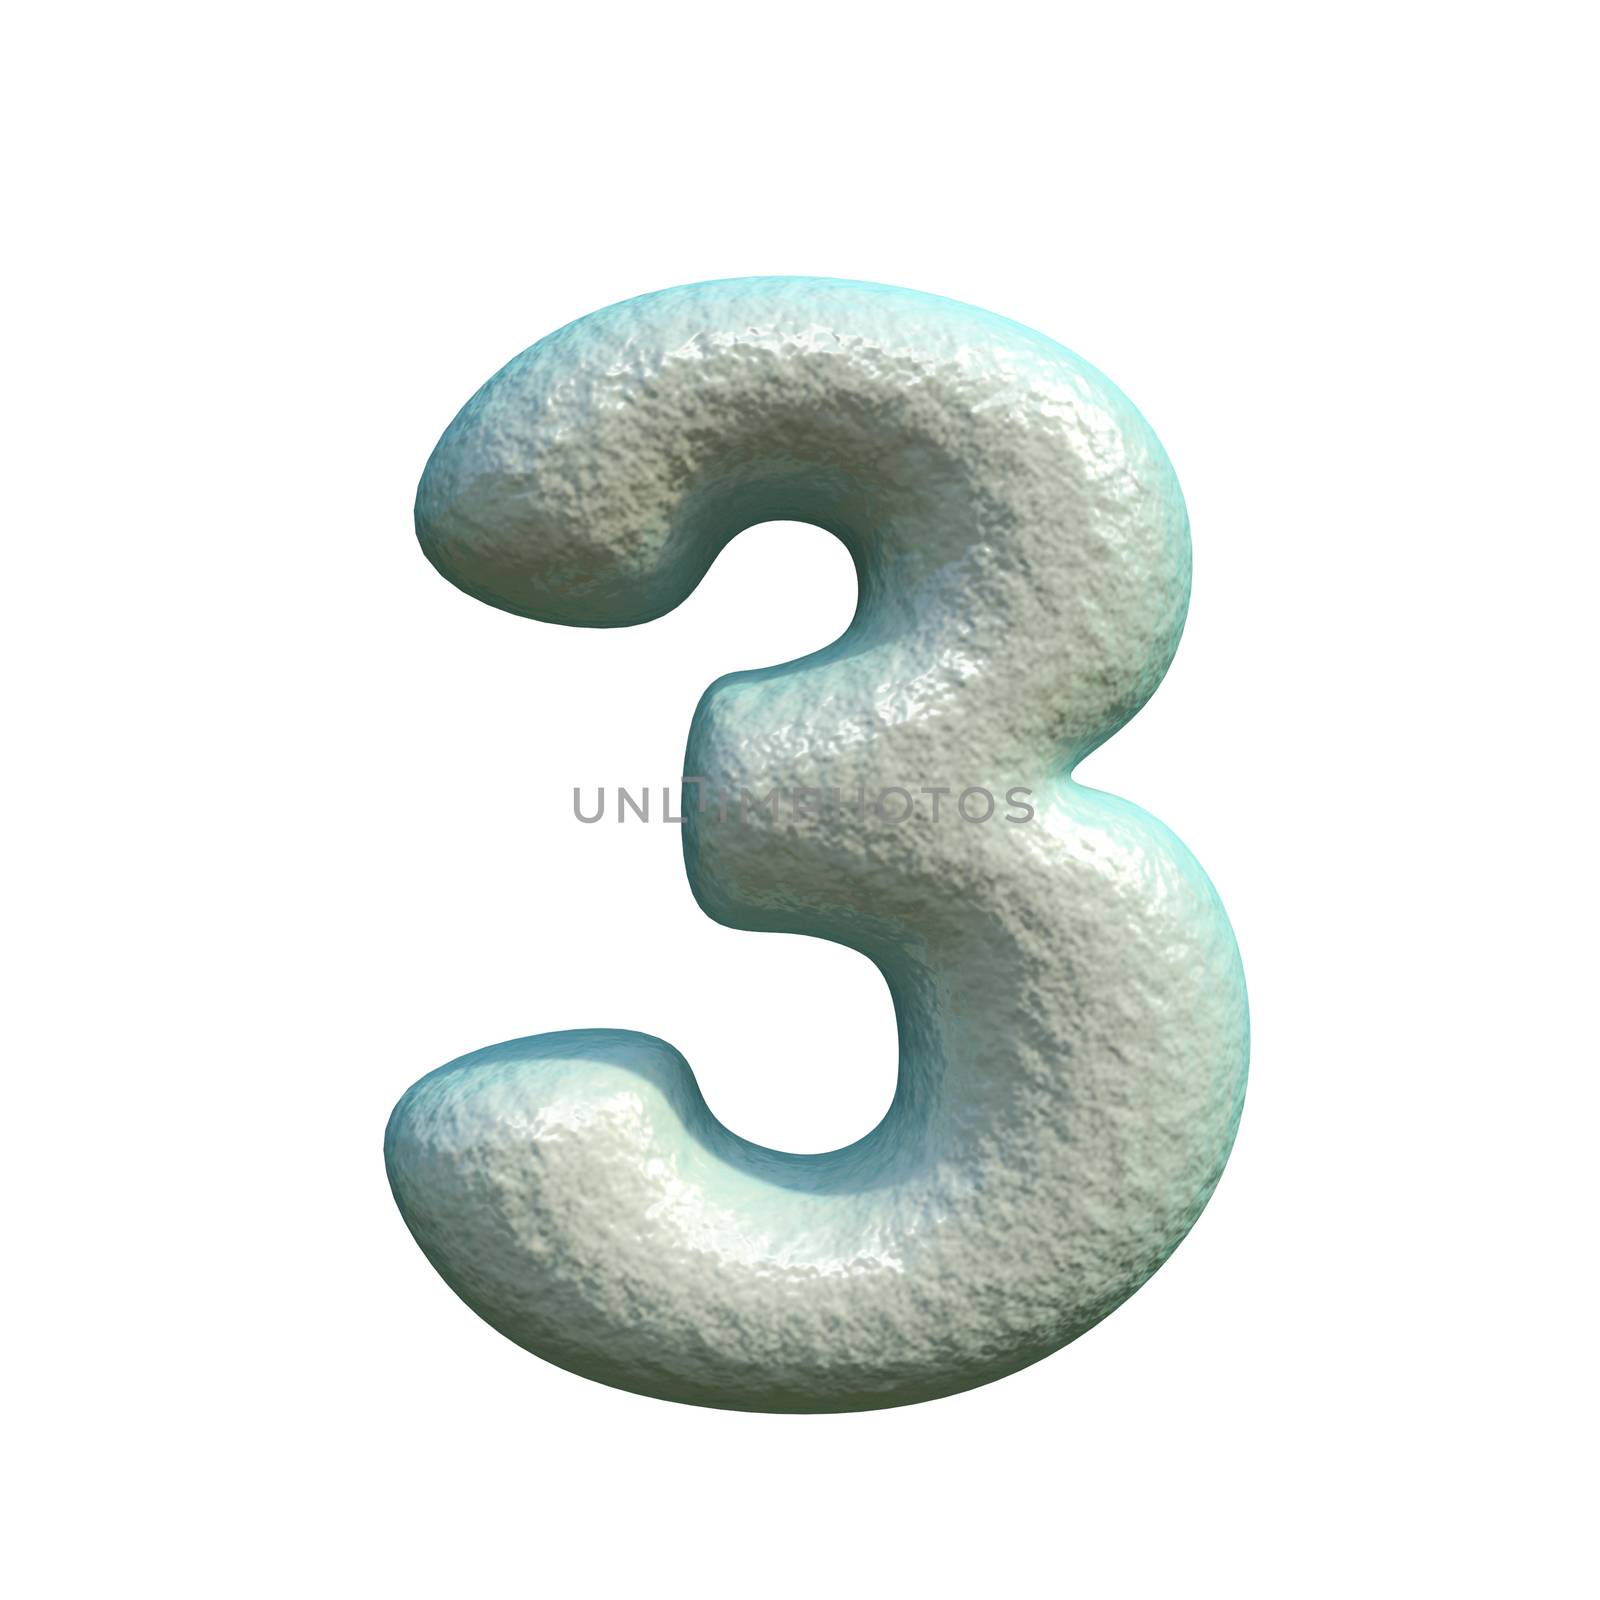 Grey blue clay Number 3 THREE 3D rendering illustration isolated on white background